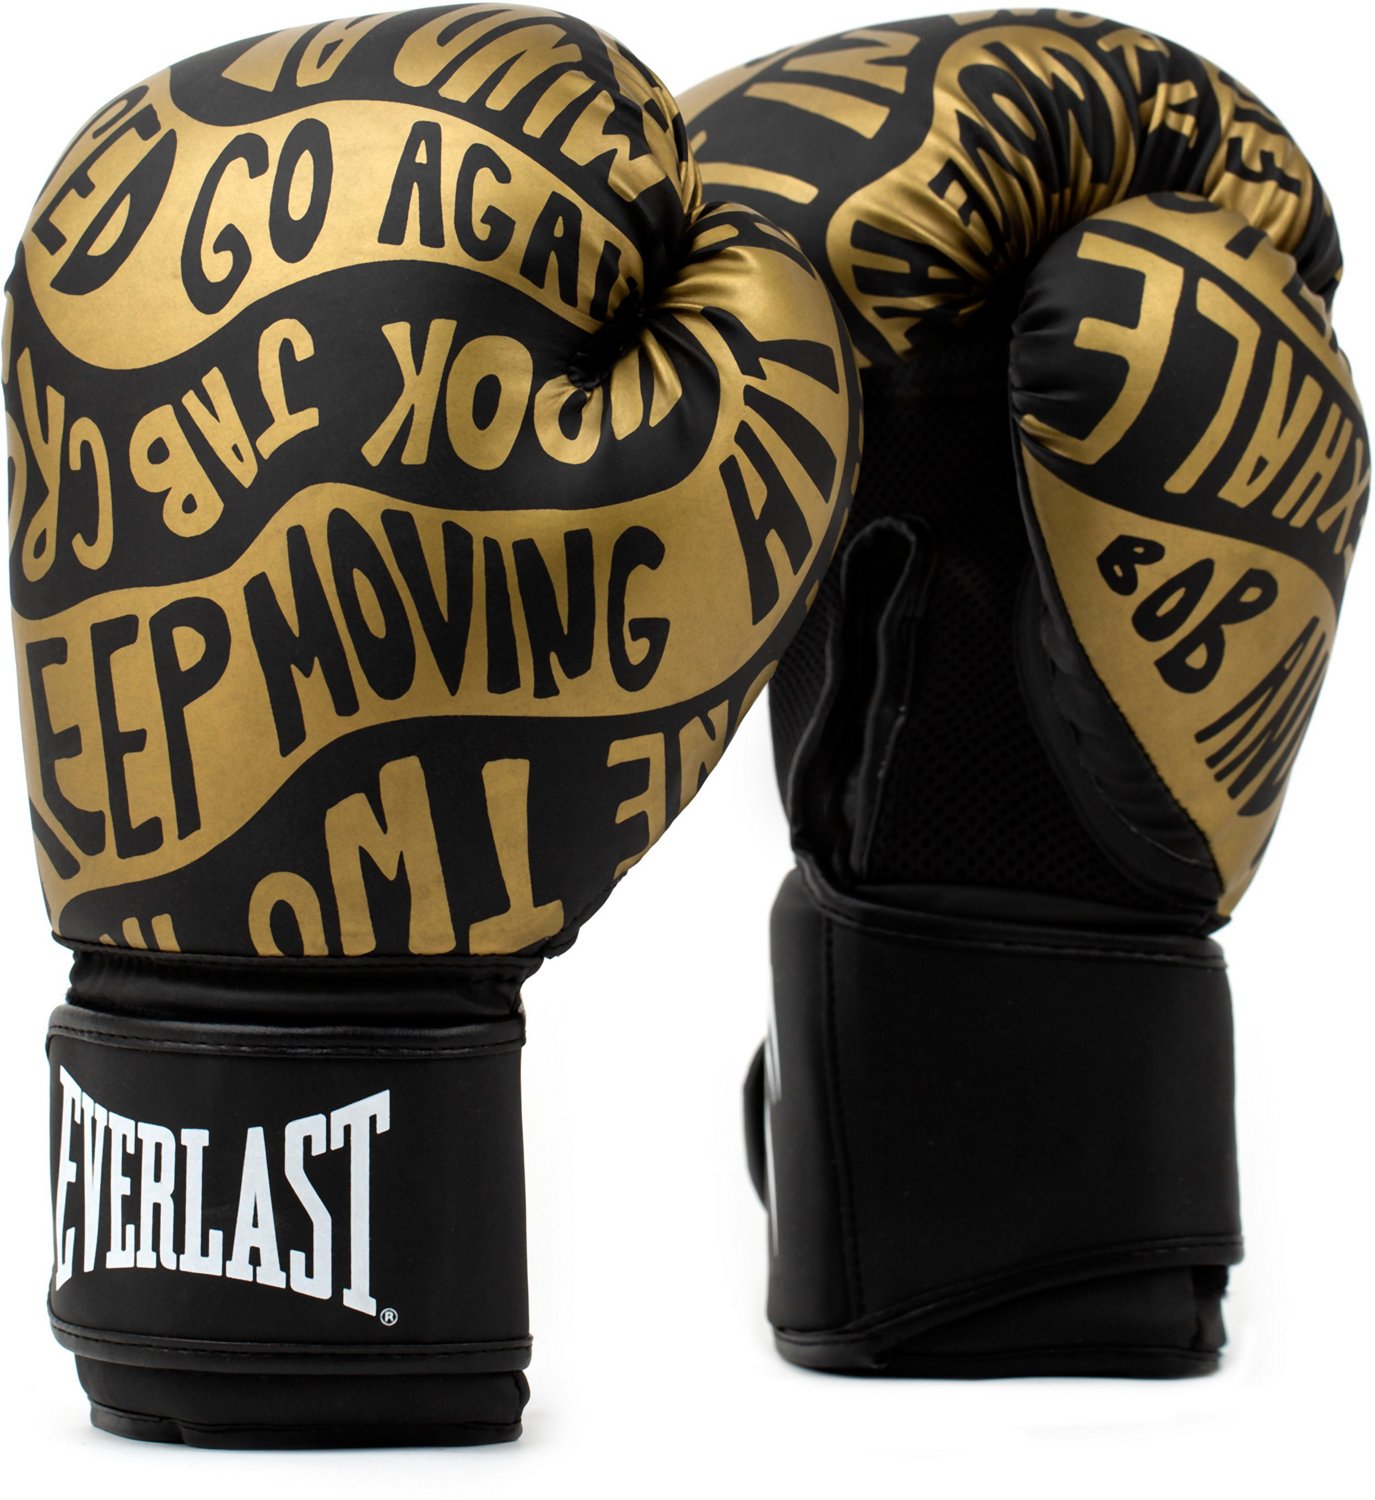 Boxing Gloves  Price Match Guaranteed